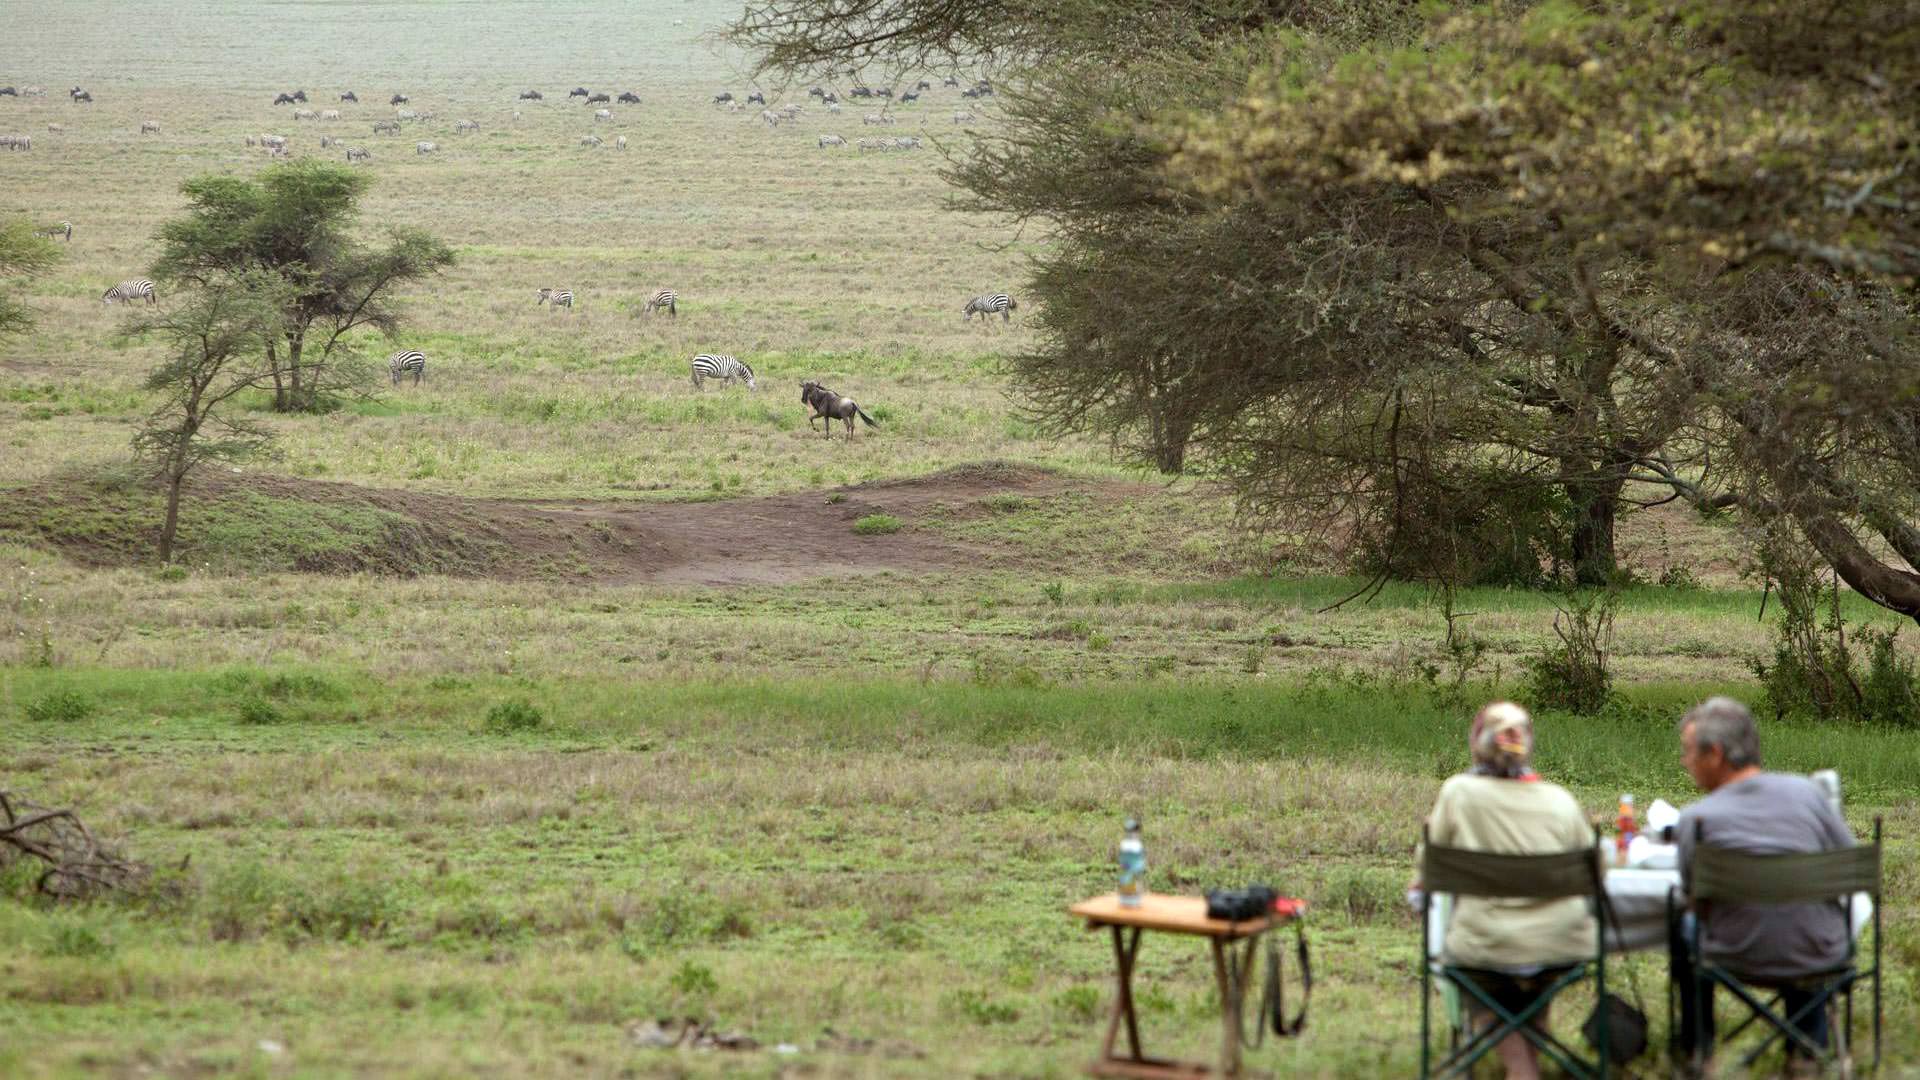 View from camp of zebra and wildebeest